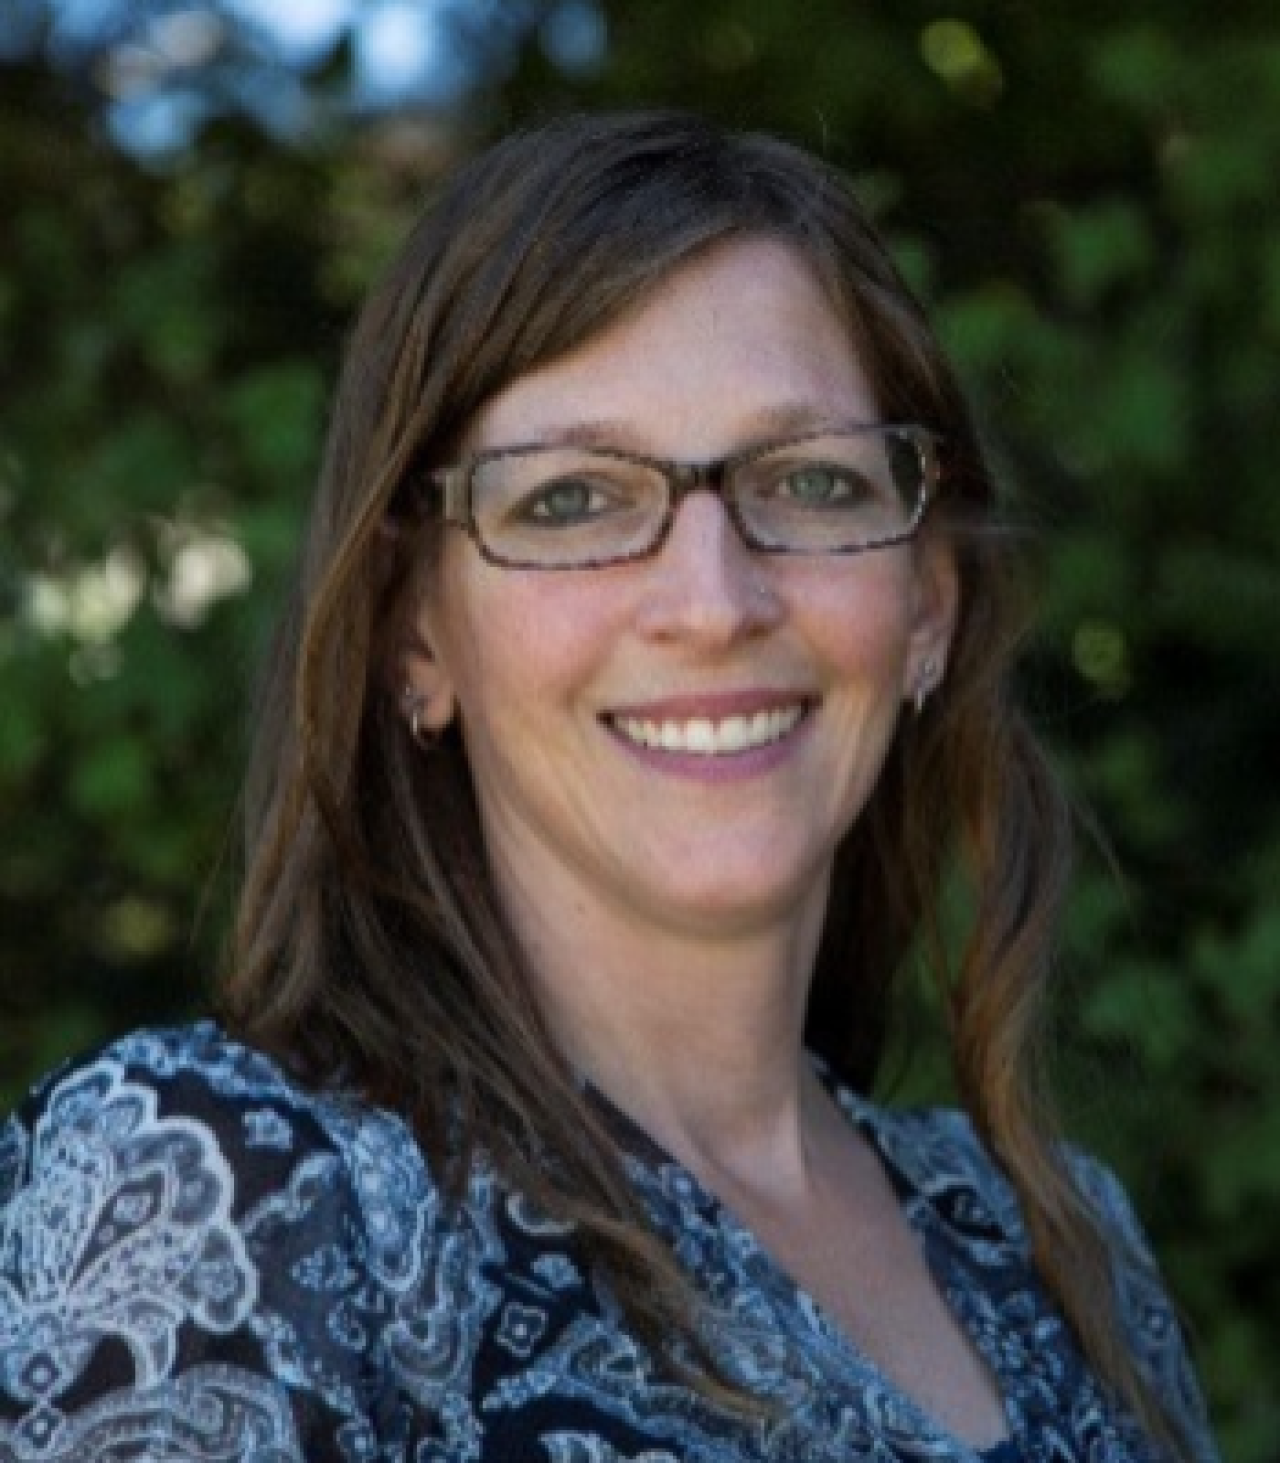 Joleen Timko, PhD's profile picture